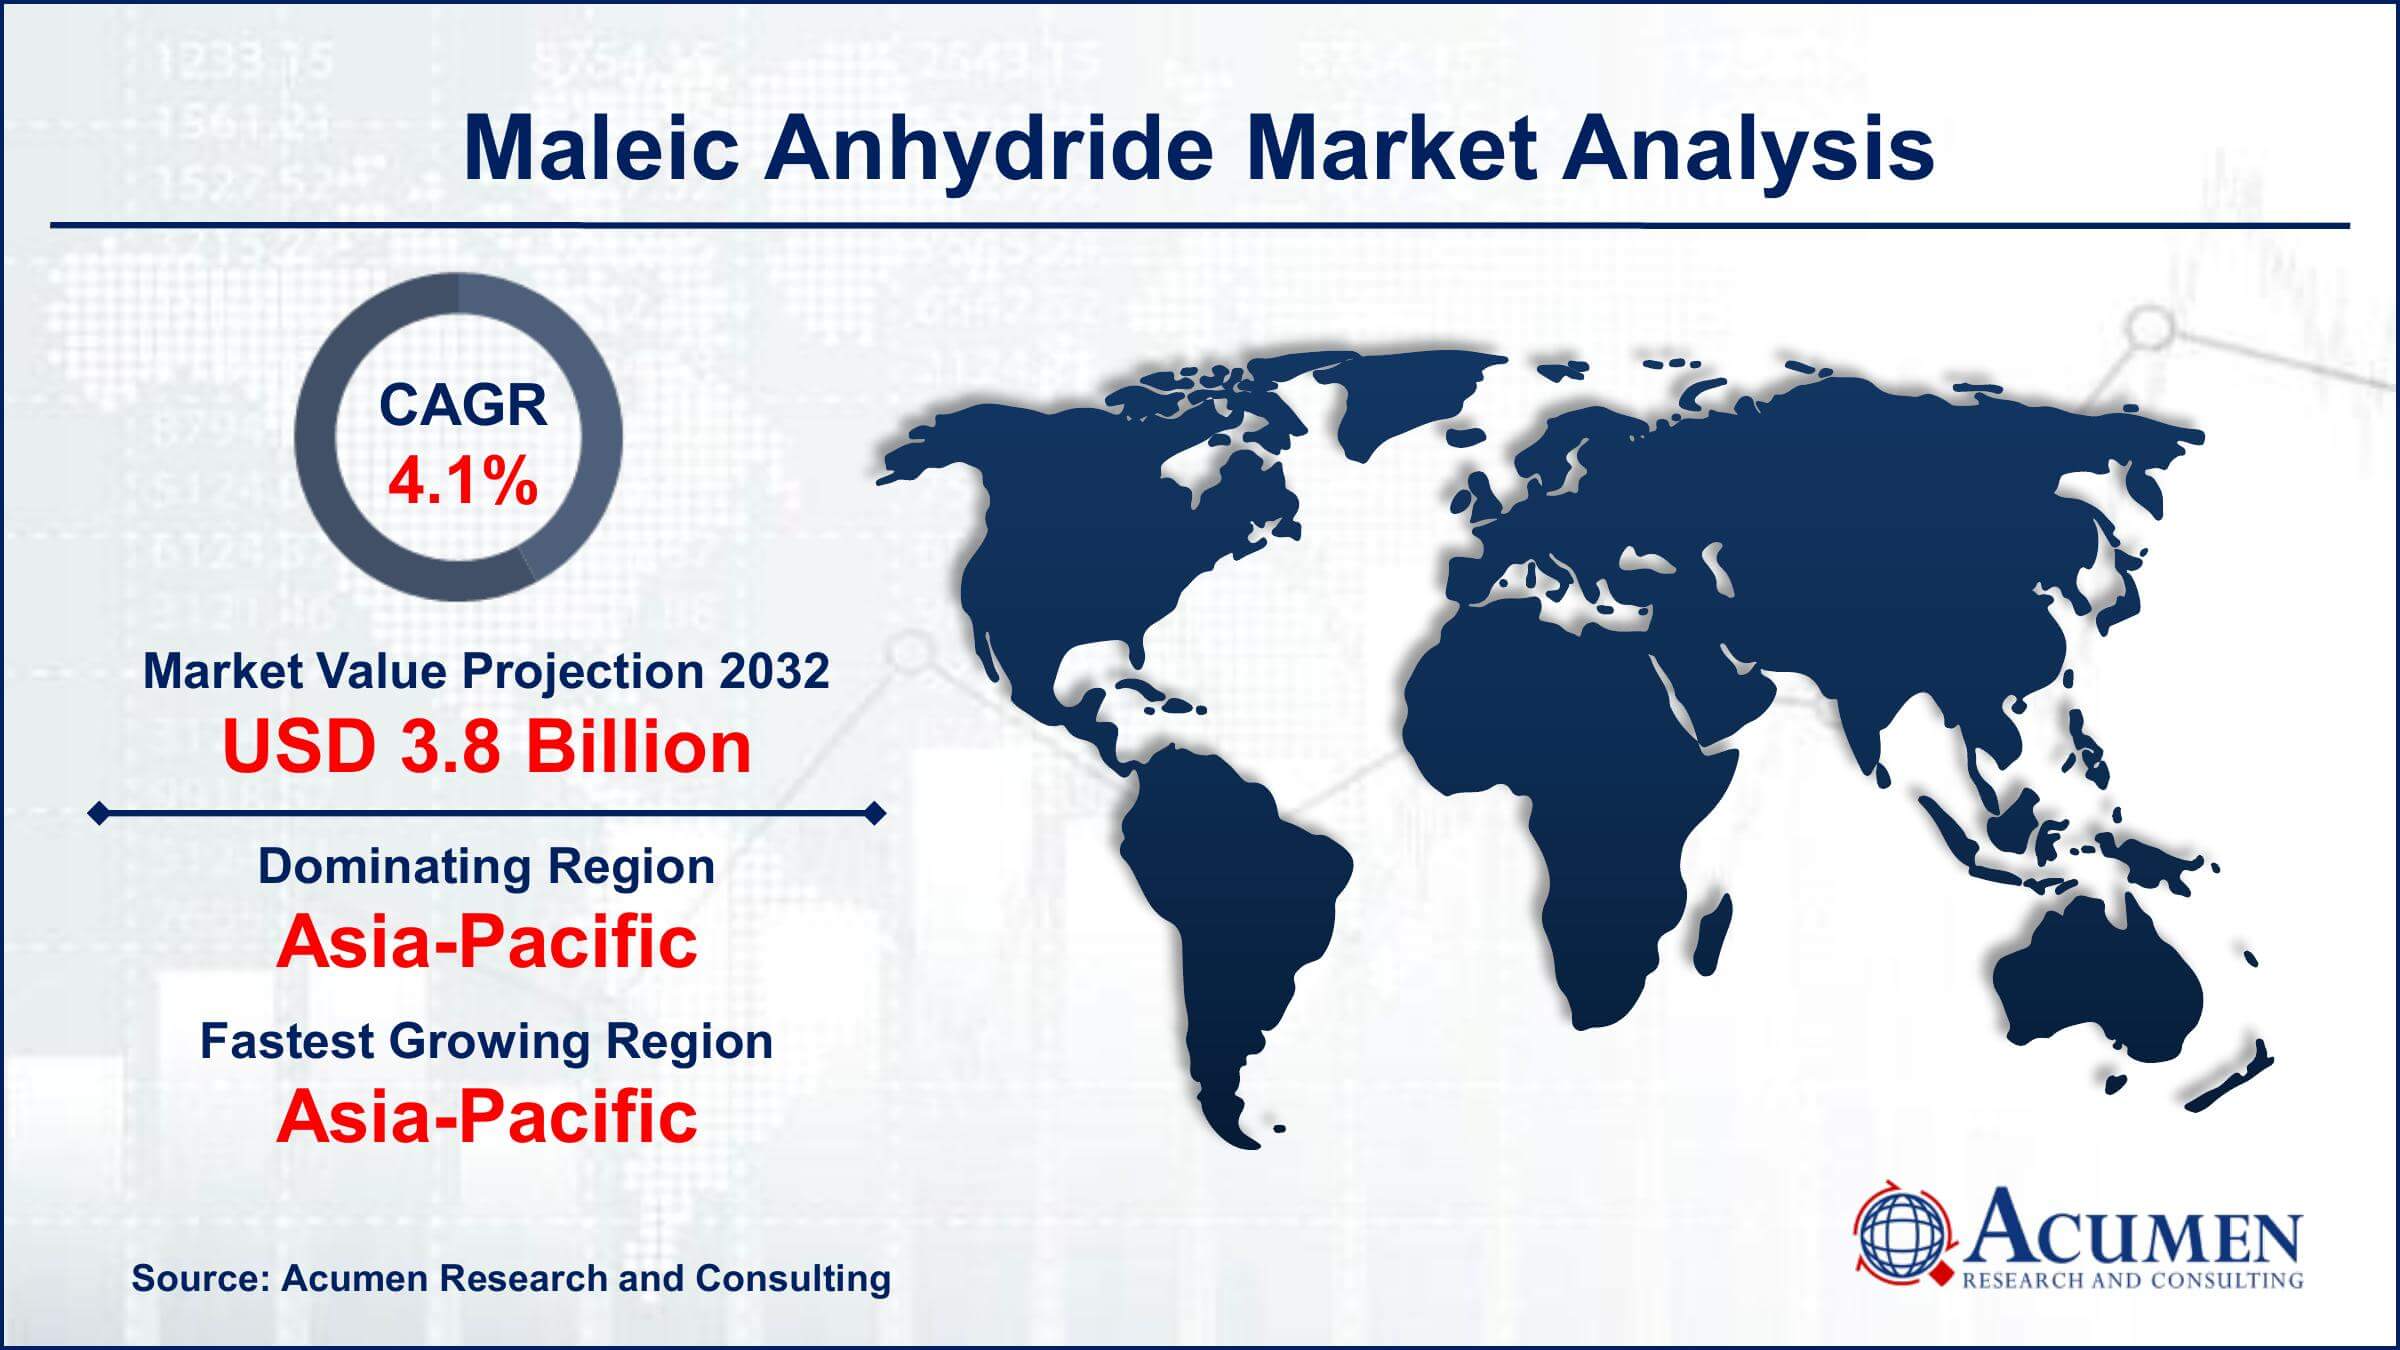 Global Maleic Anhydride Market Trends